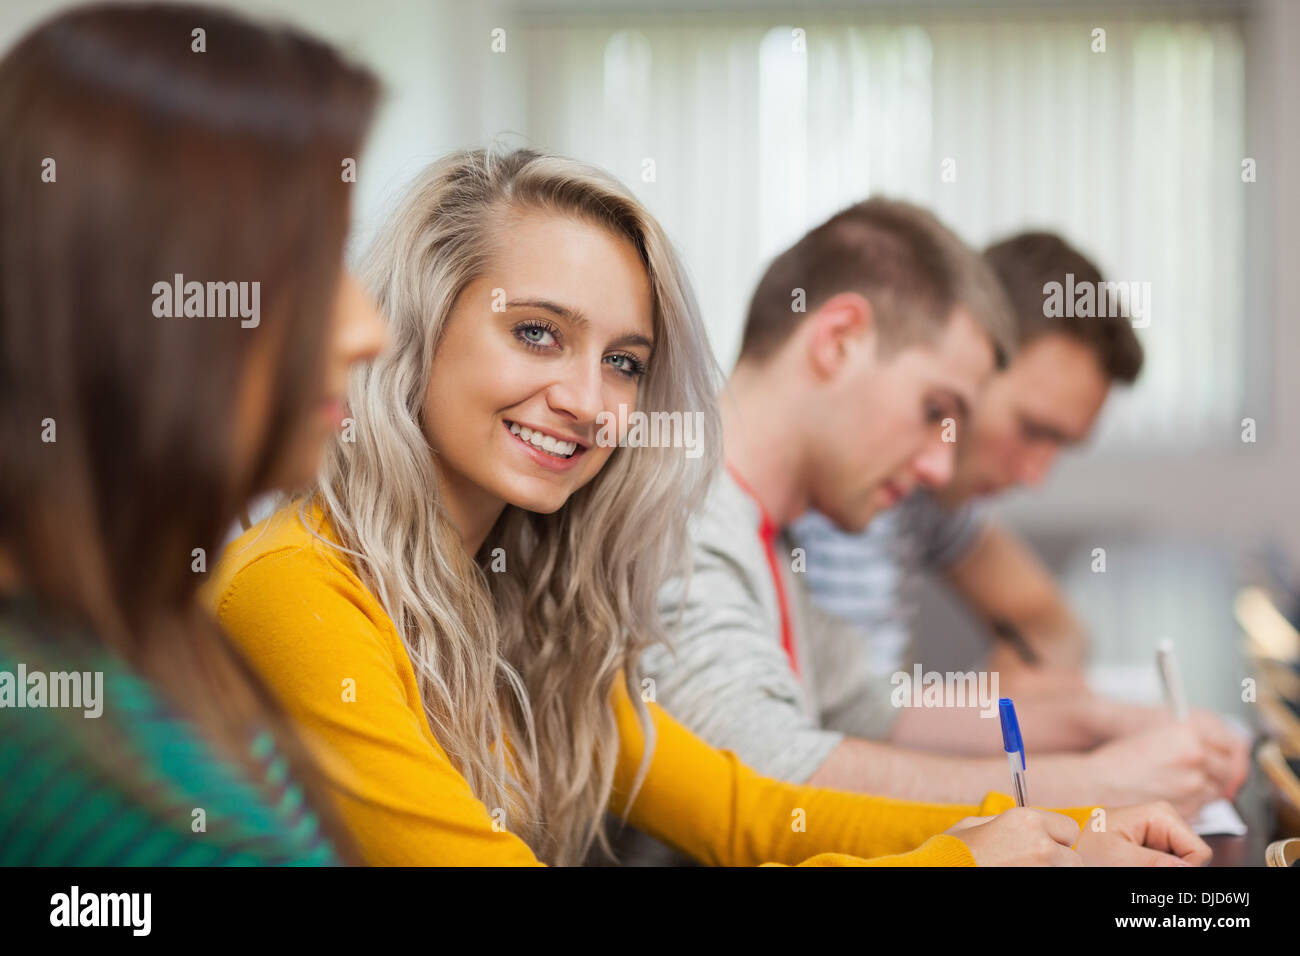 Blonde happy student looking at camera Stock Photo